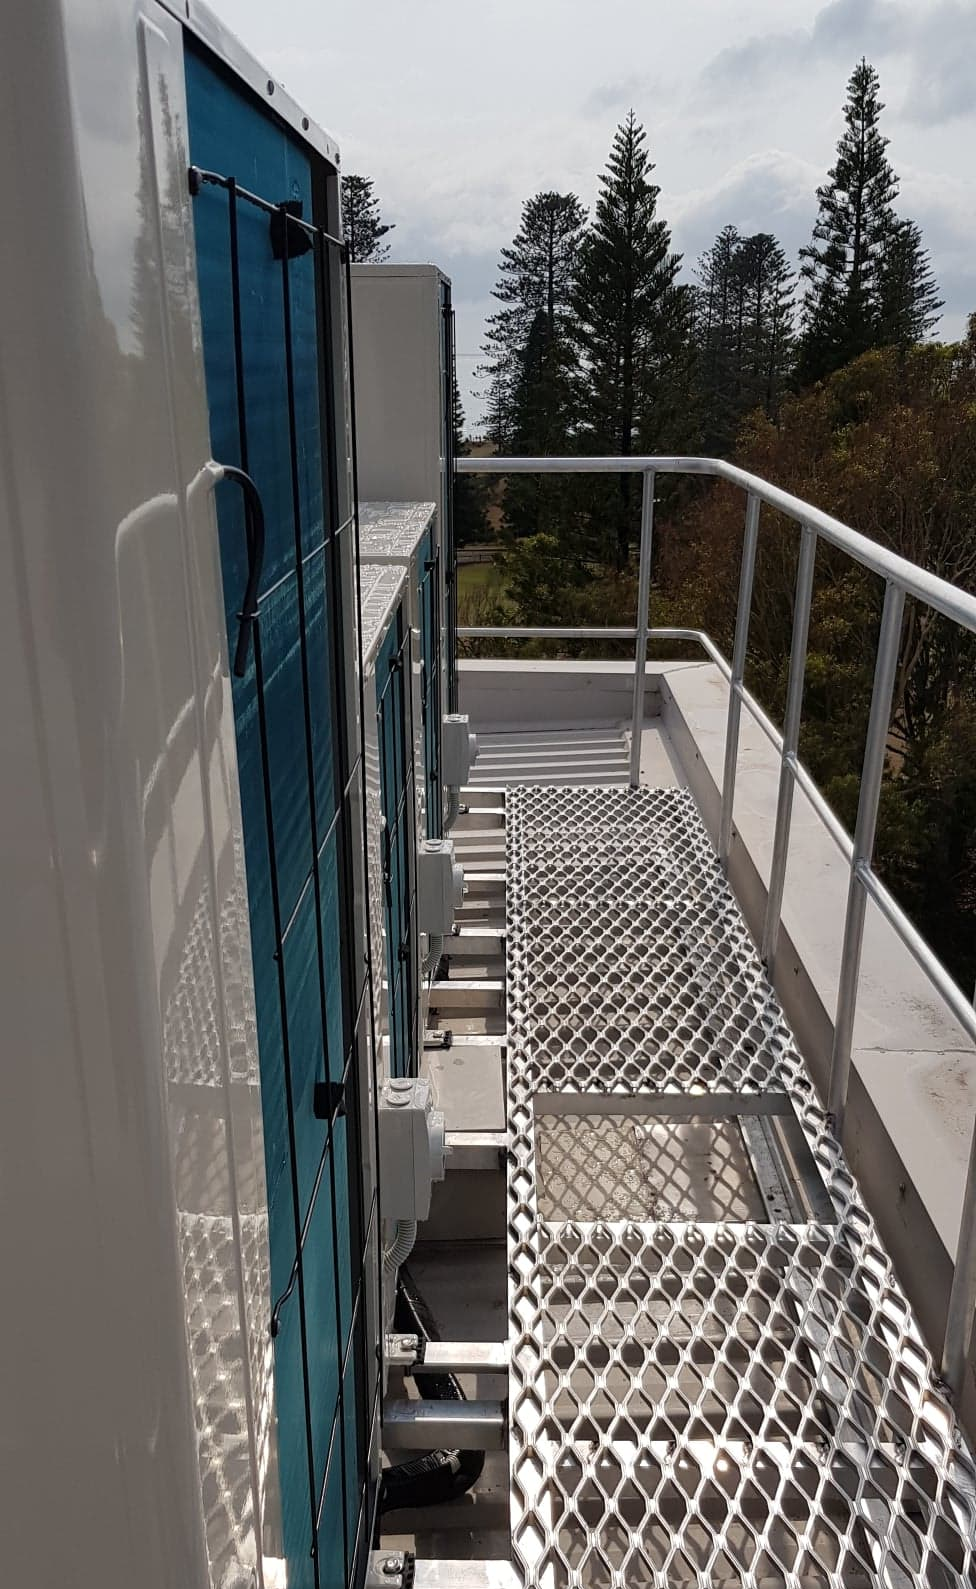 New Installed Air Conditioning — Gleeson’s Refrigeration & Air Conditioning in Port Macquarie NSW